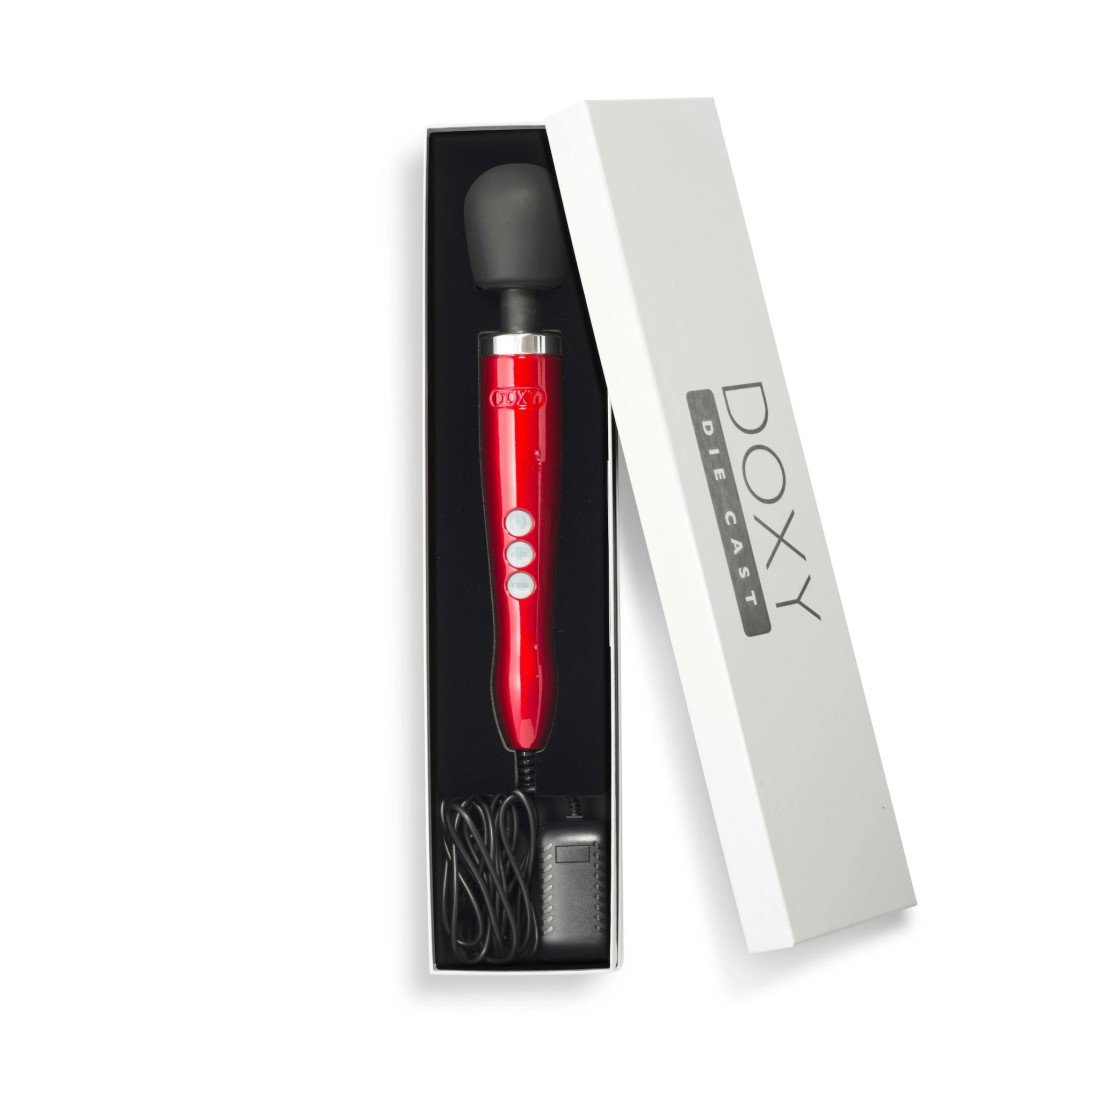 Doxy Die Cast Metal Red Plug-In Vibrating Wand Massager